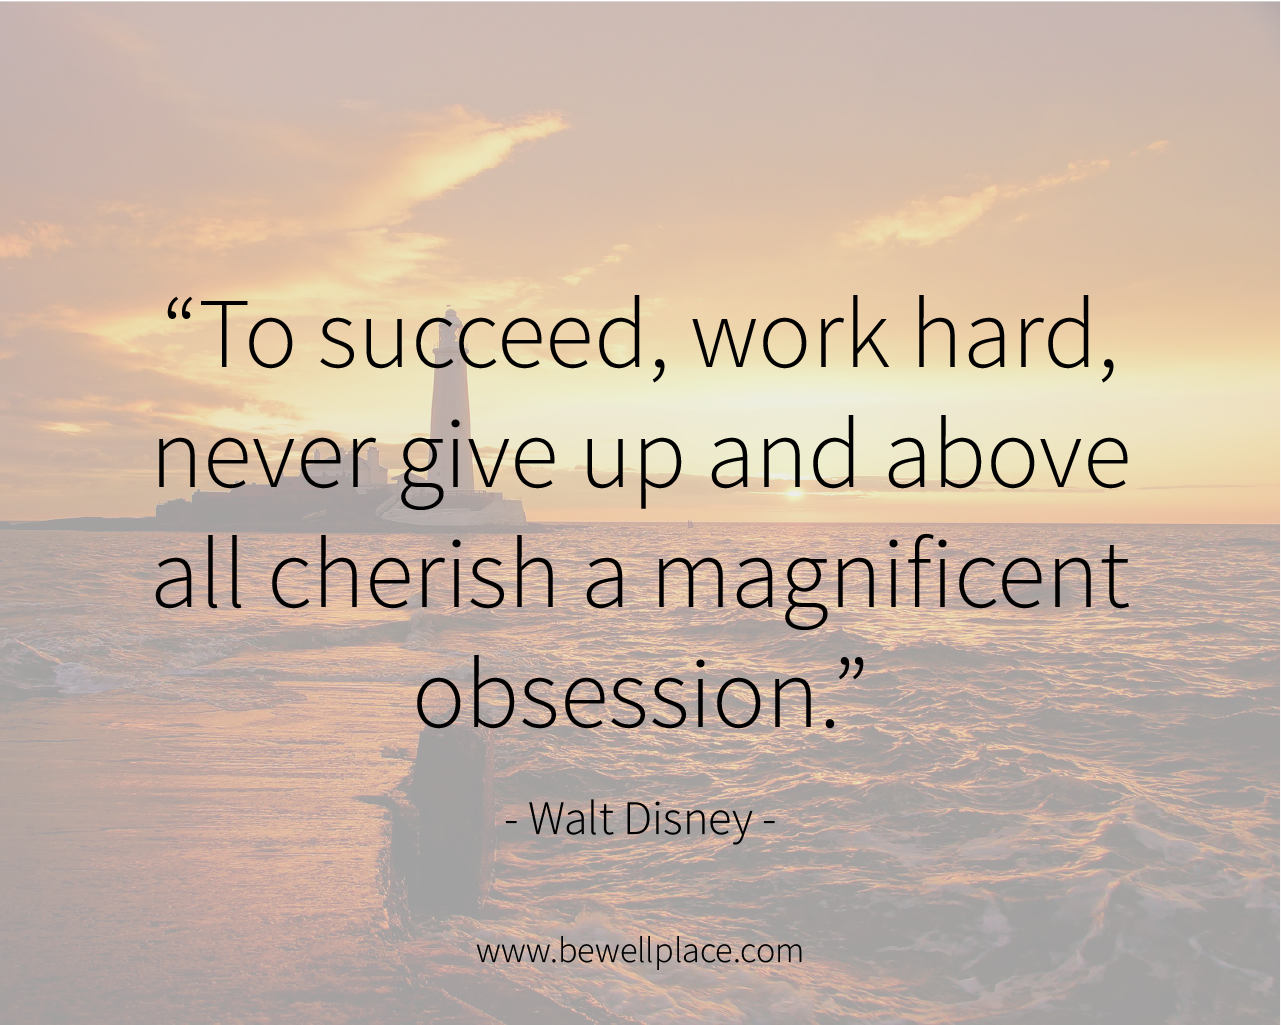 To succeed, work hard, never give up and above all cherish a magnificent obsession. - Walt Disney